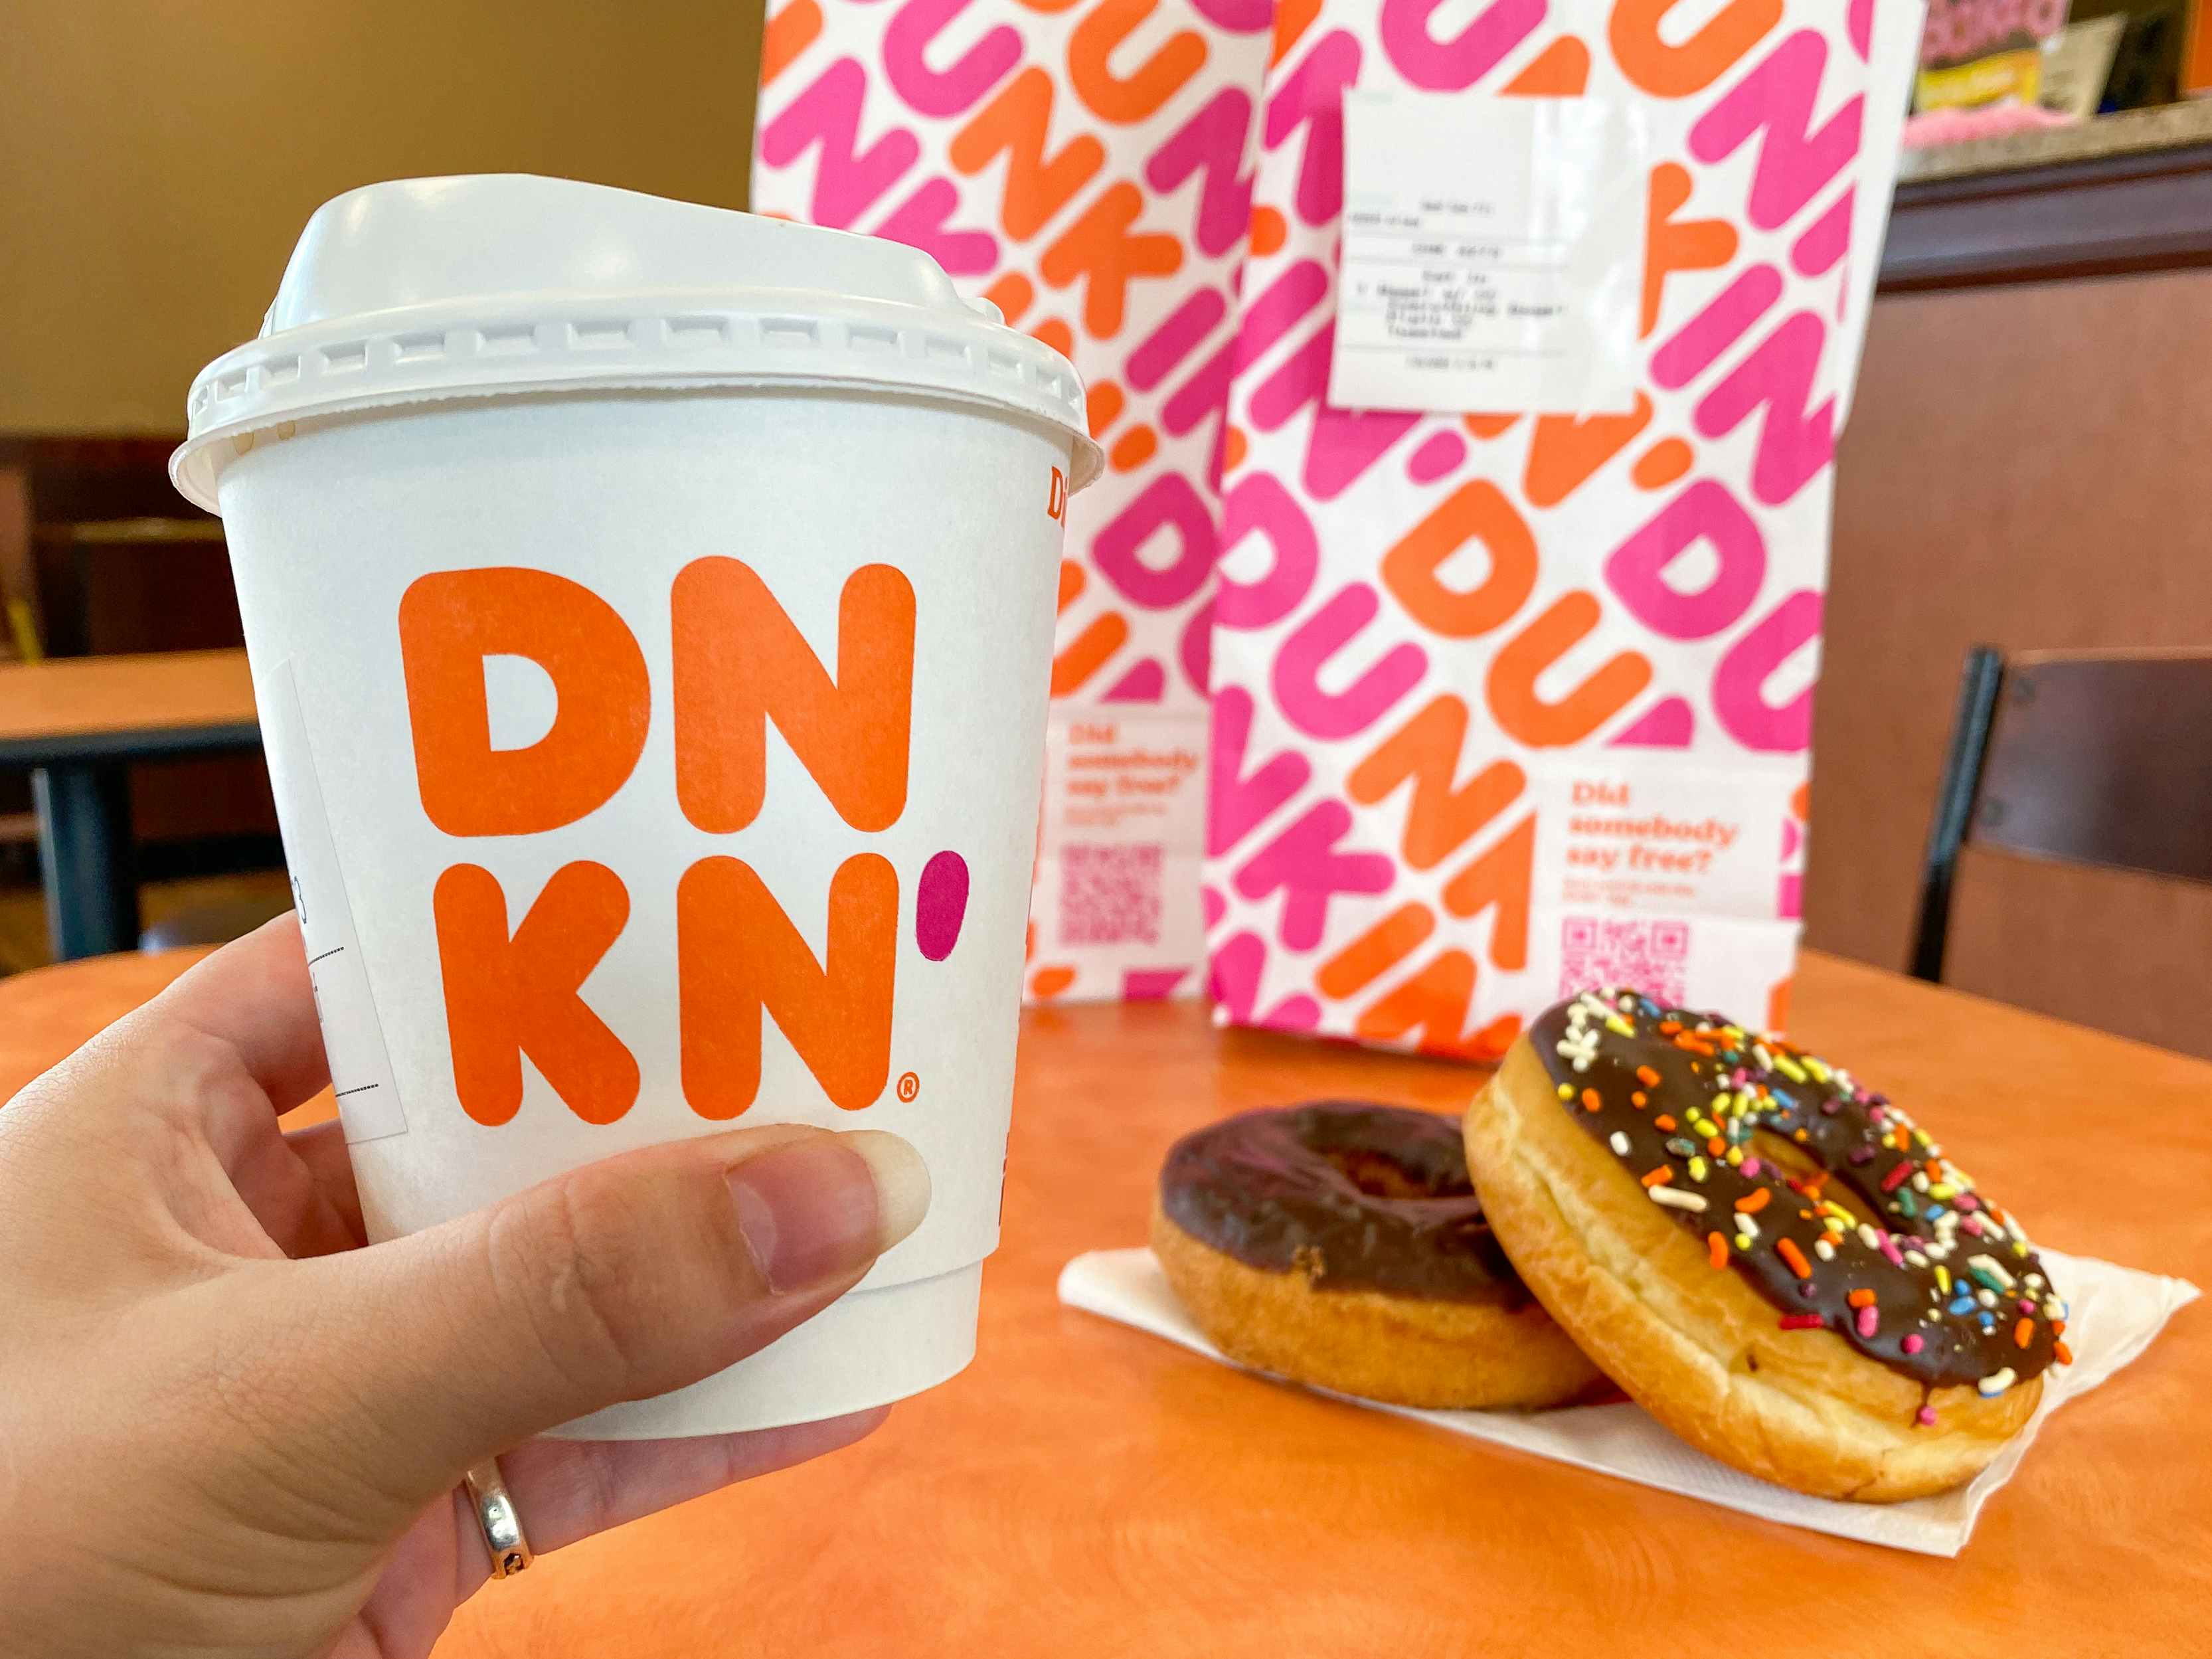 A person's hand holding up a small Dunkin coffee in front of some donuts and a bag sitting on a table inside Dunkin.